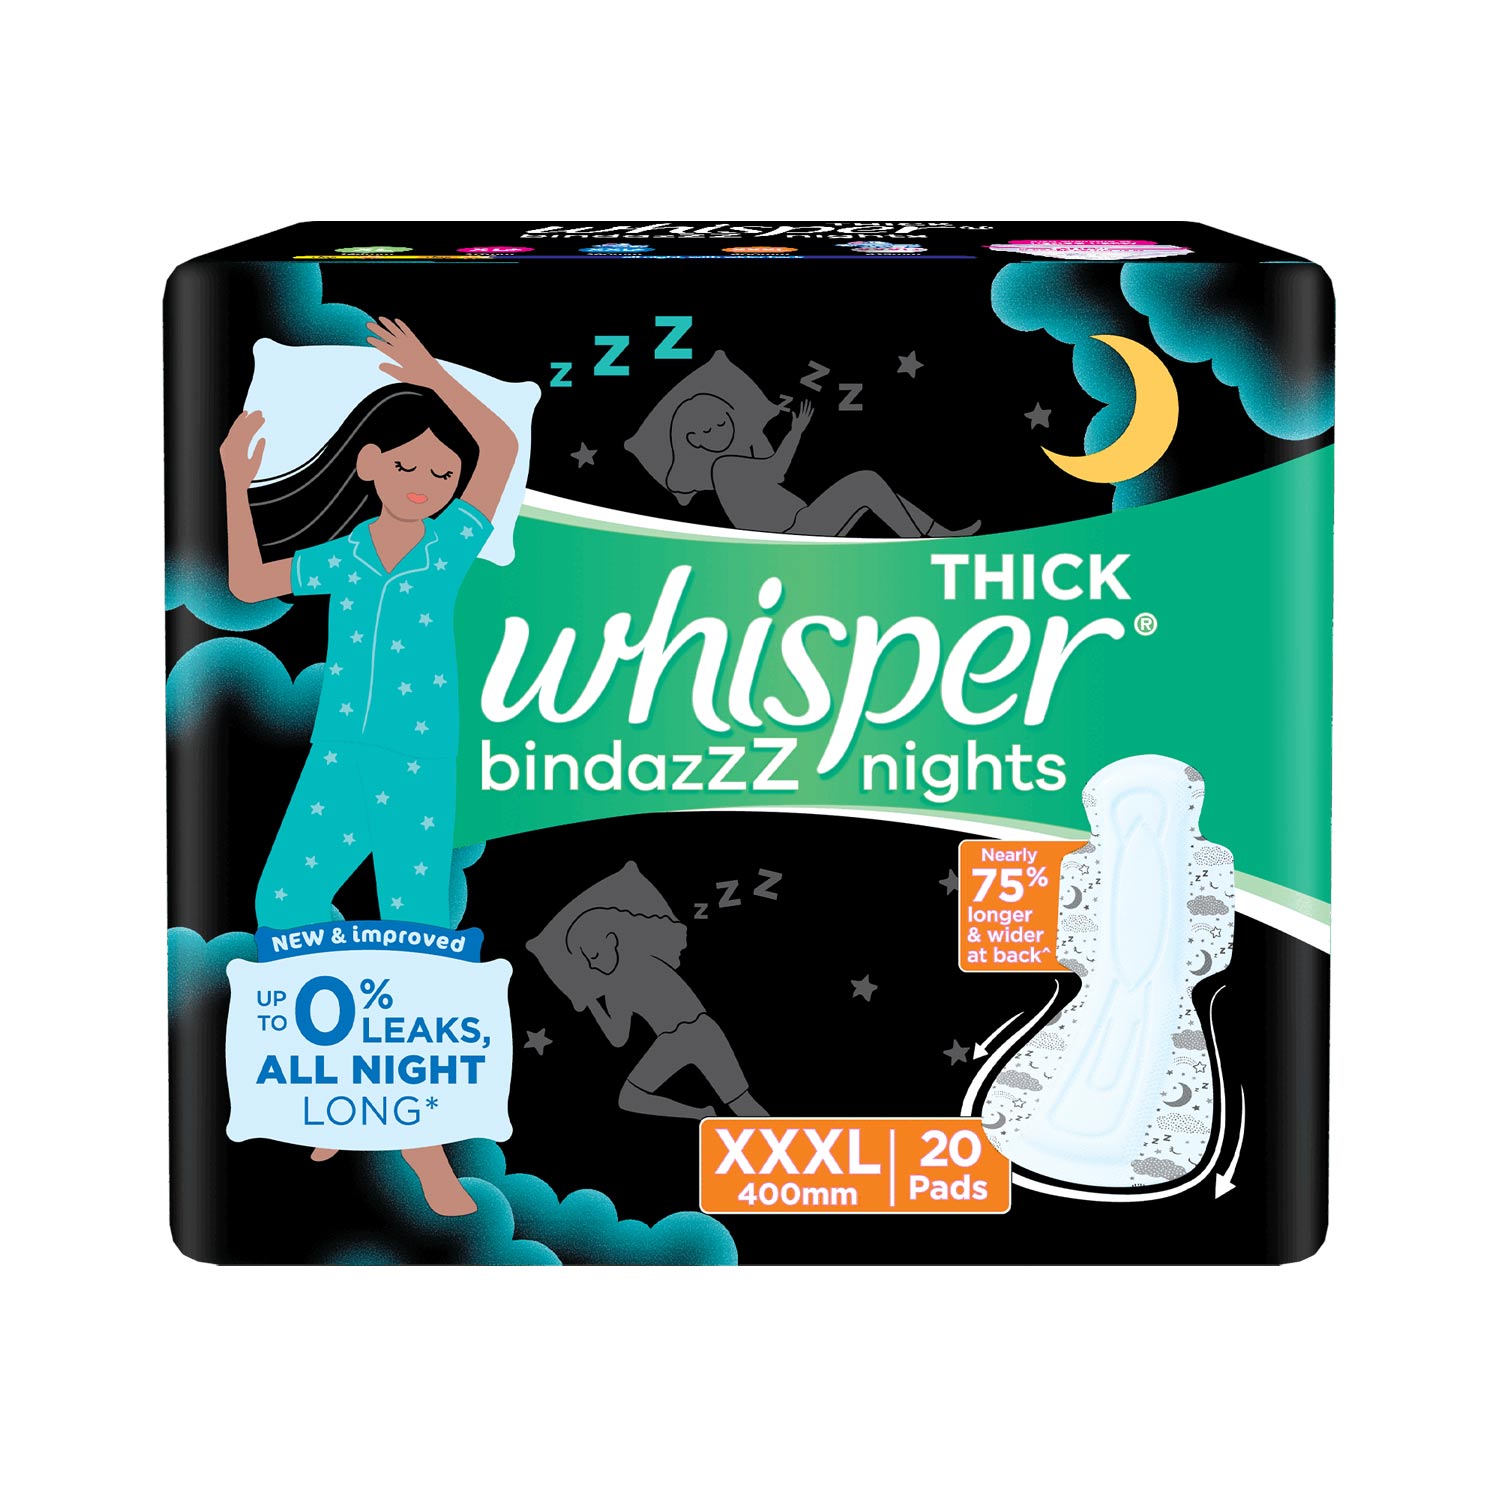 Whisper Bindazzz Night Sanitary Pads|20 Thick Pads|XXXL|upto 0% Leaks|Suitable for Heavy Flow|75% Longer & Wider back|Comfortable Cushiony soft wings|40 cm Long|With disposable wrap